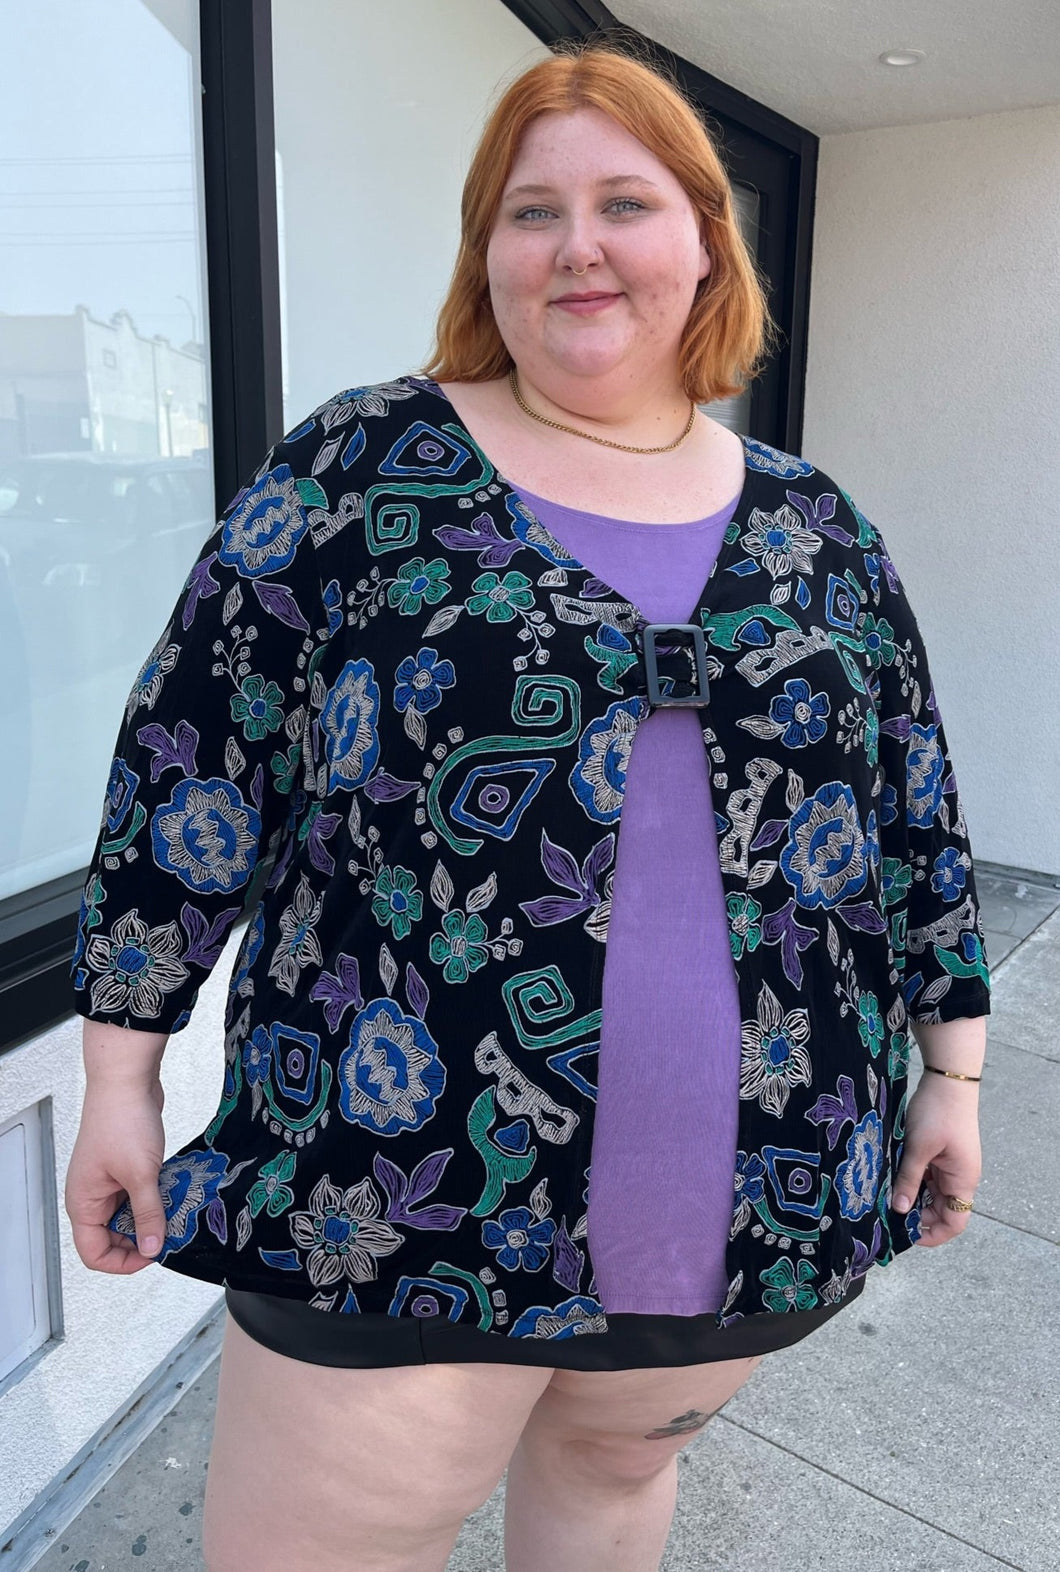 Front view of a size 30/32 Maggie Barnes Vintage black, muted purple, blue, teal, and green mixed pattern floral and geometric blouse with undershirt styled with a pleather mini skirt on a size 22/24 model. The photo is taken outside in natural lighting.